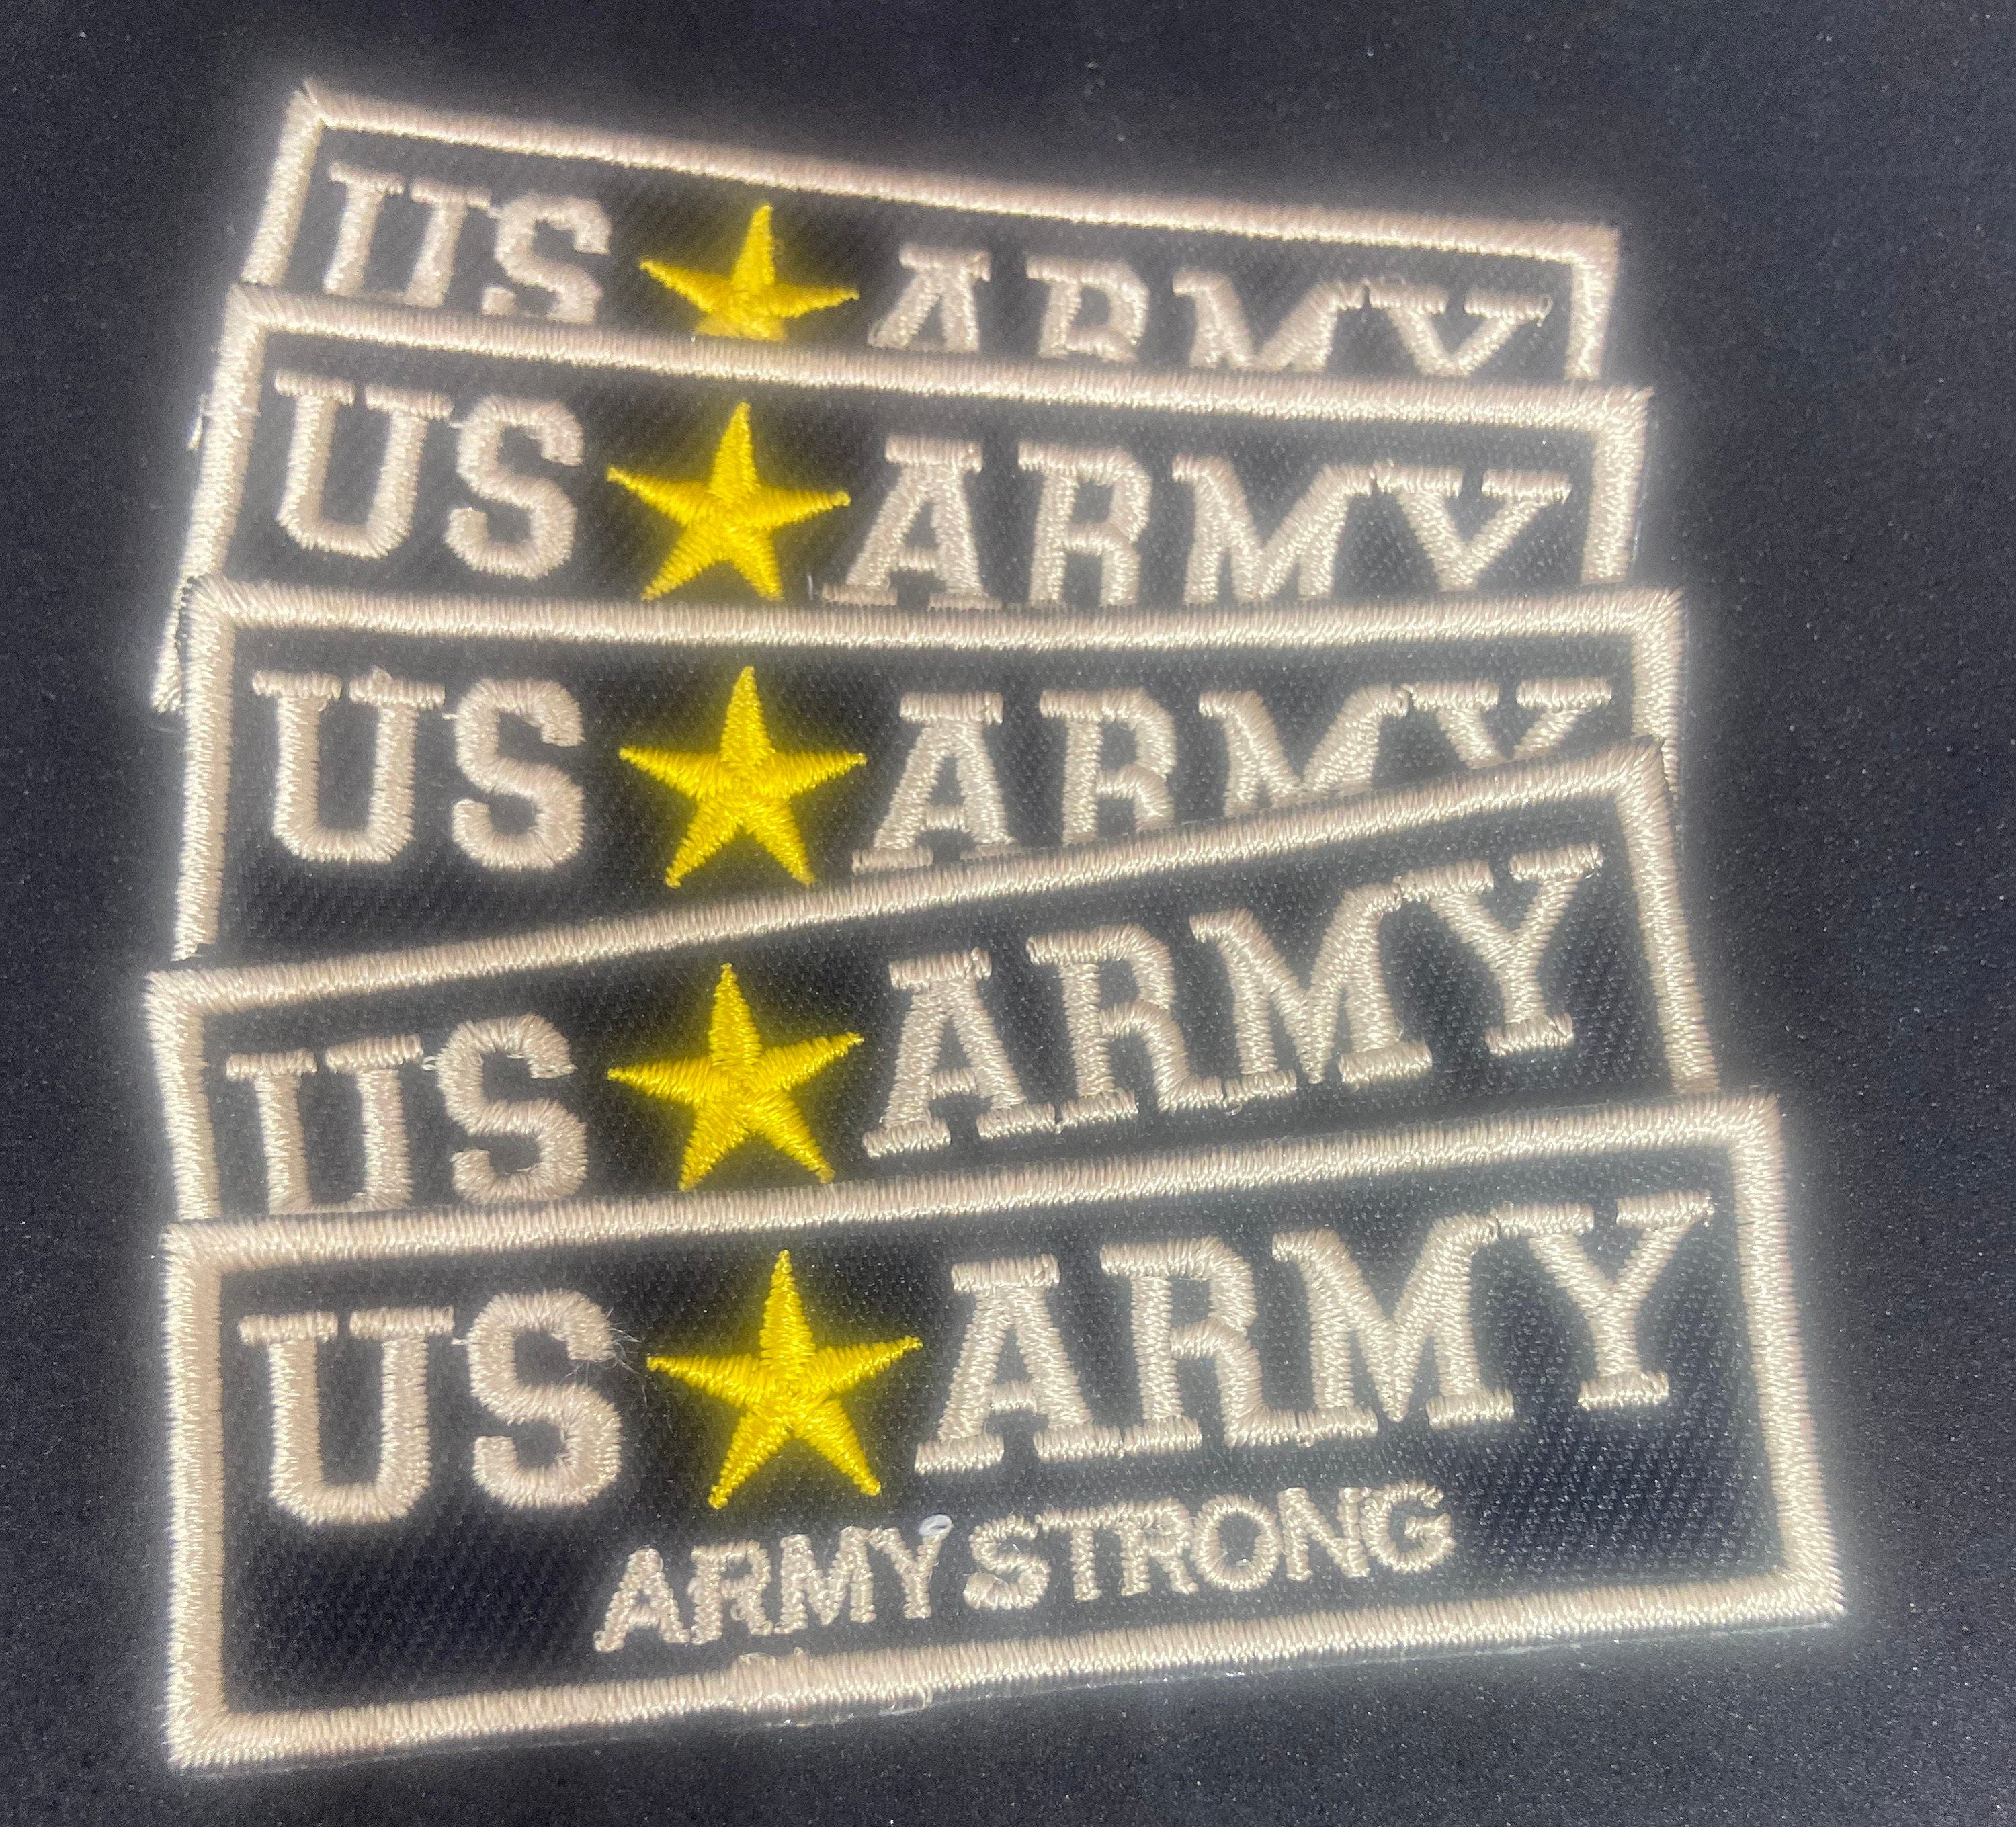 Small Navy and Army Iron or Sew on Patch